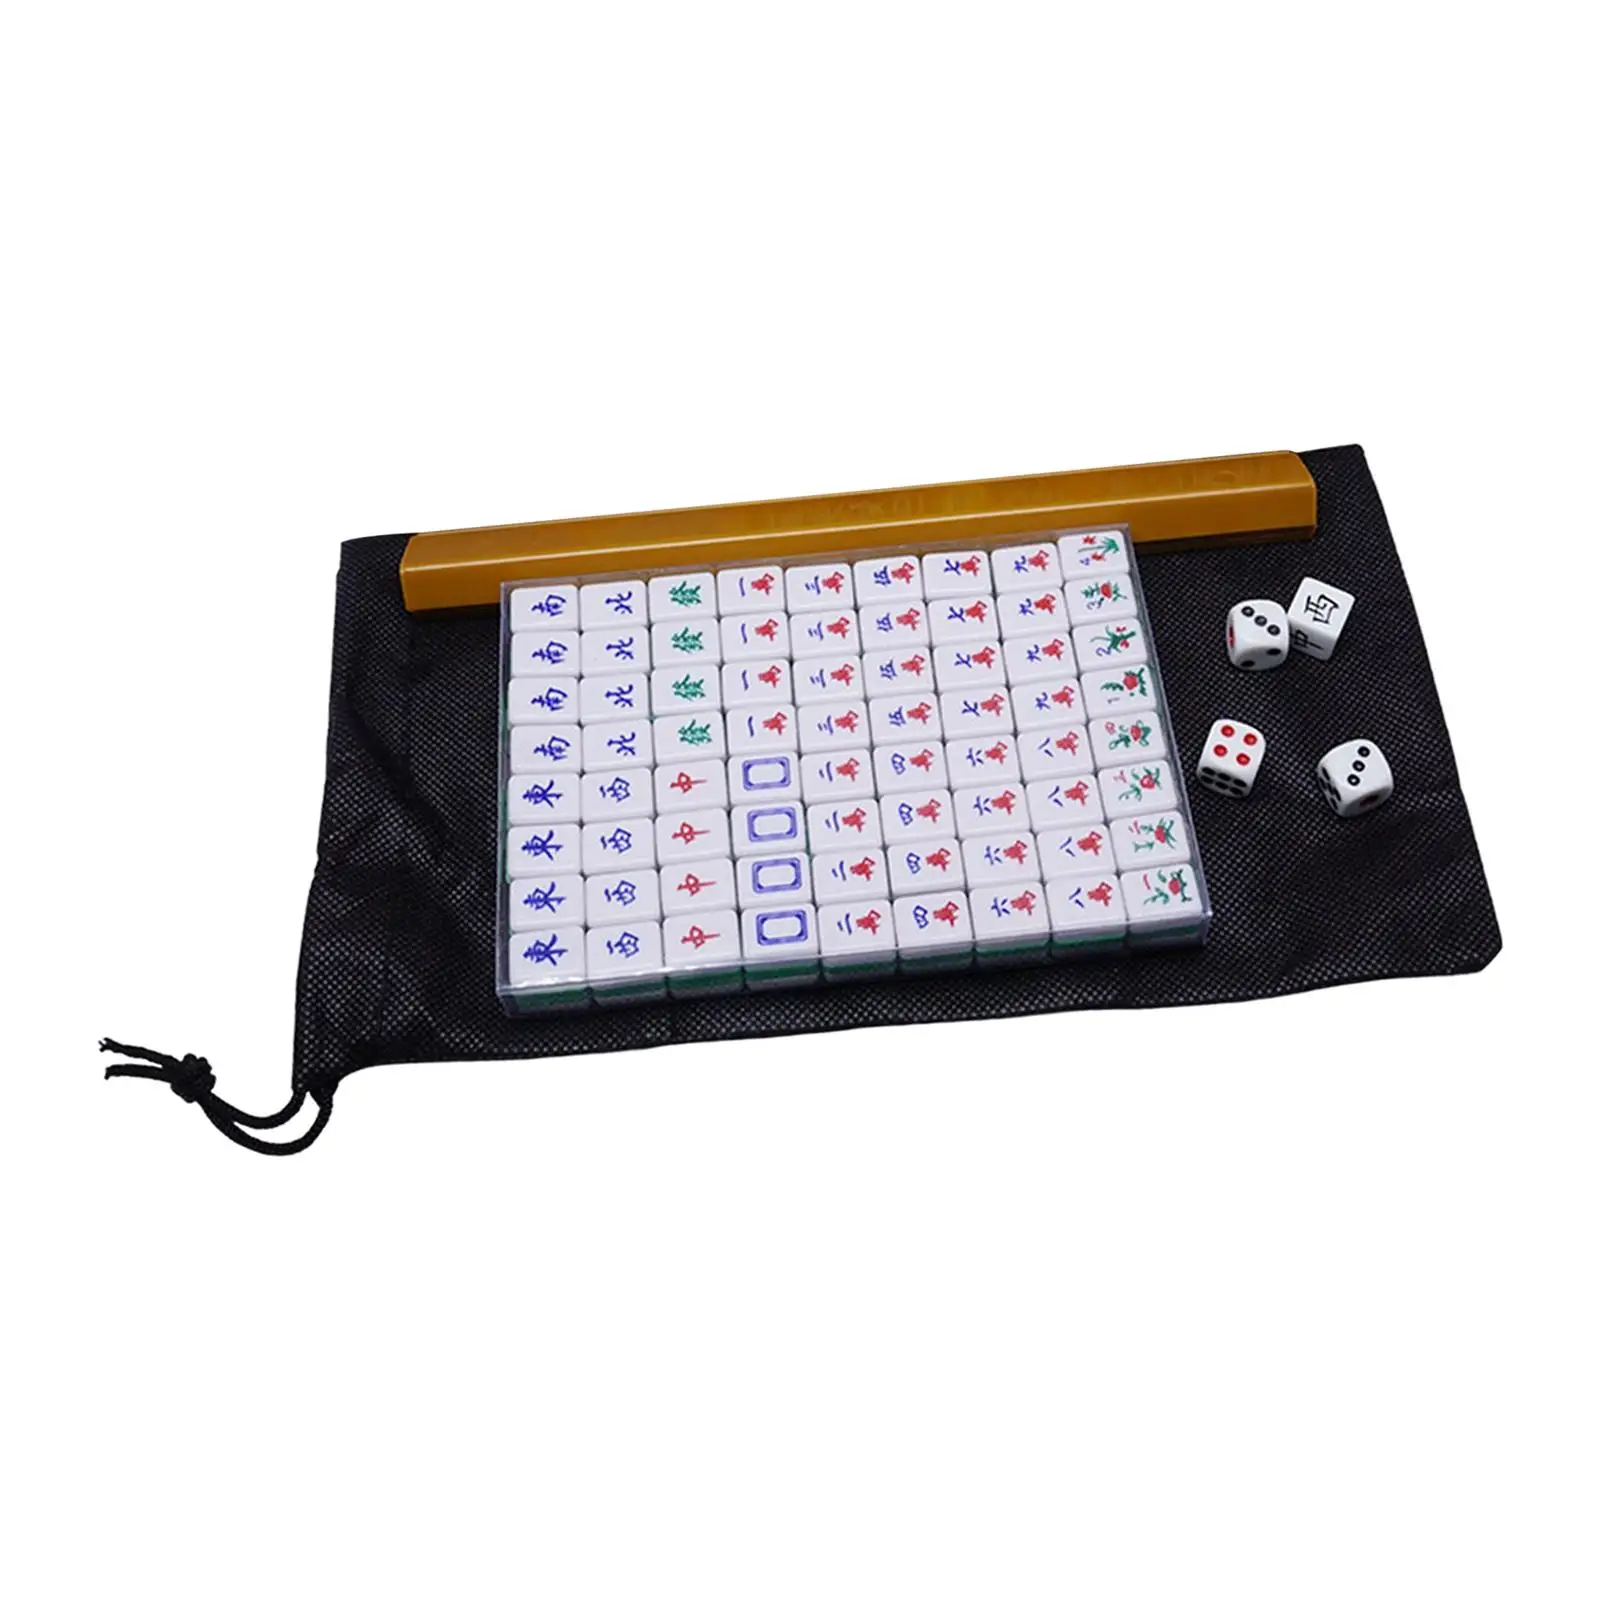 Traditional Chinese Mahjong Game Set Friends Leisure Tile Tiles Games Board Game for Chinese Game Play Party Home